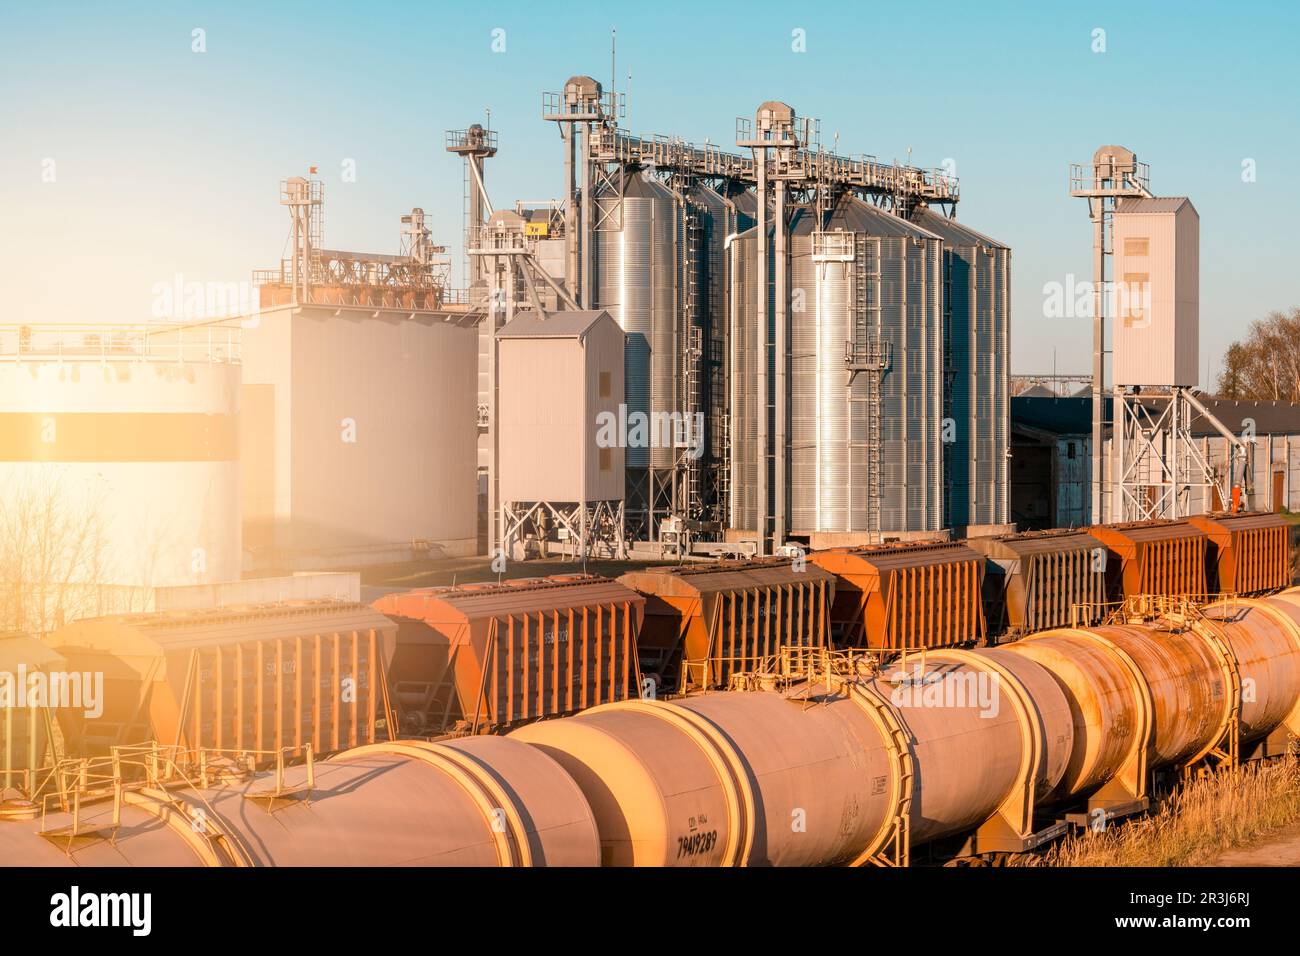 Trains shipping grain and fuel oil Stock Photo